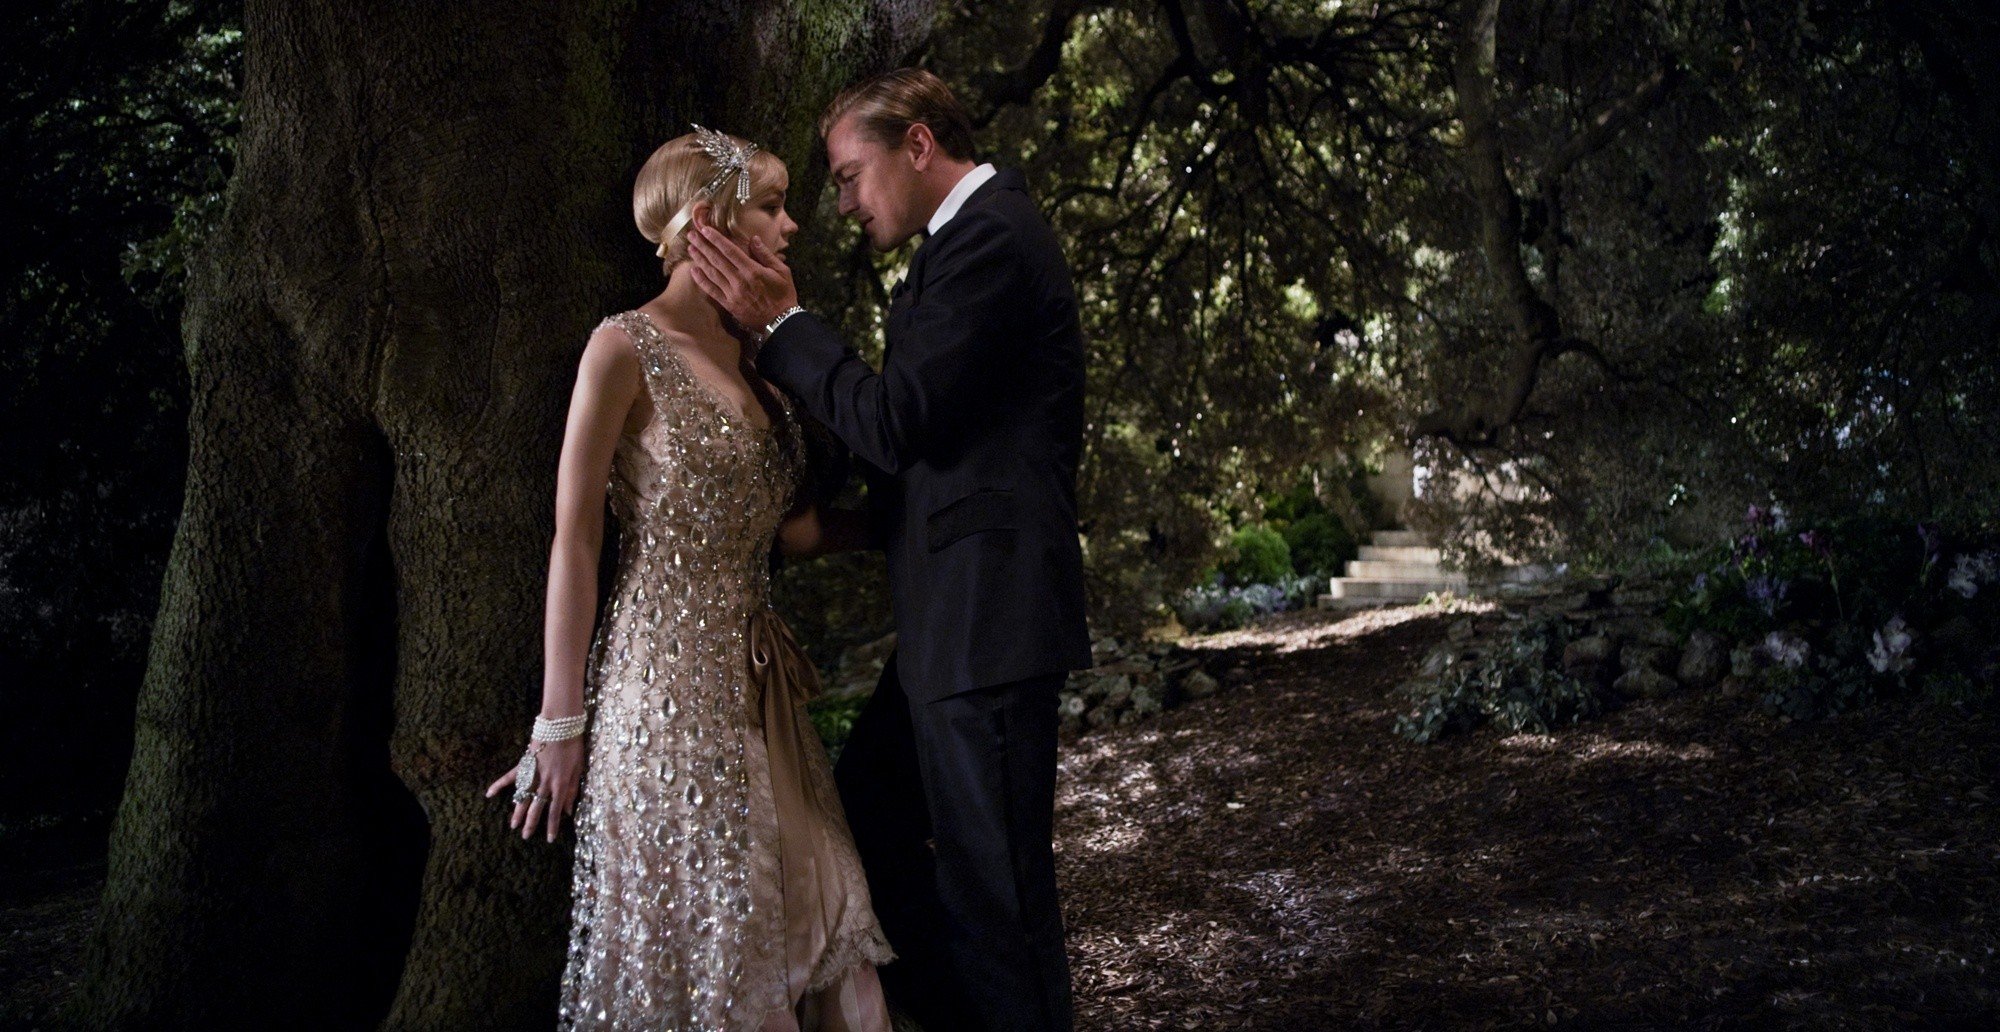 Carey Mulligan stars as Daisy Buchanan and Leonardo DiCaprio stars as Jay Gatsby in Warner Bros. Pictures' The Great Gatsby (2013)